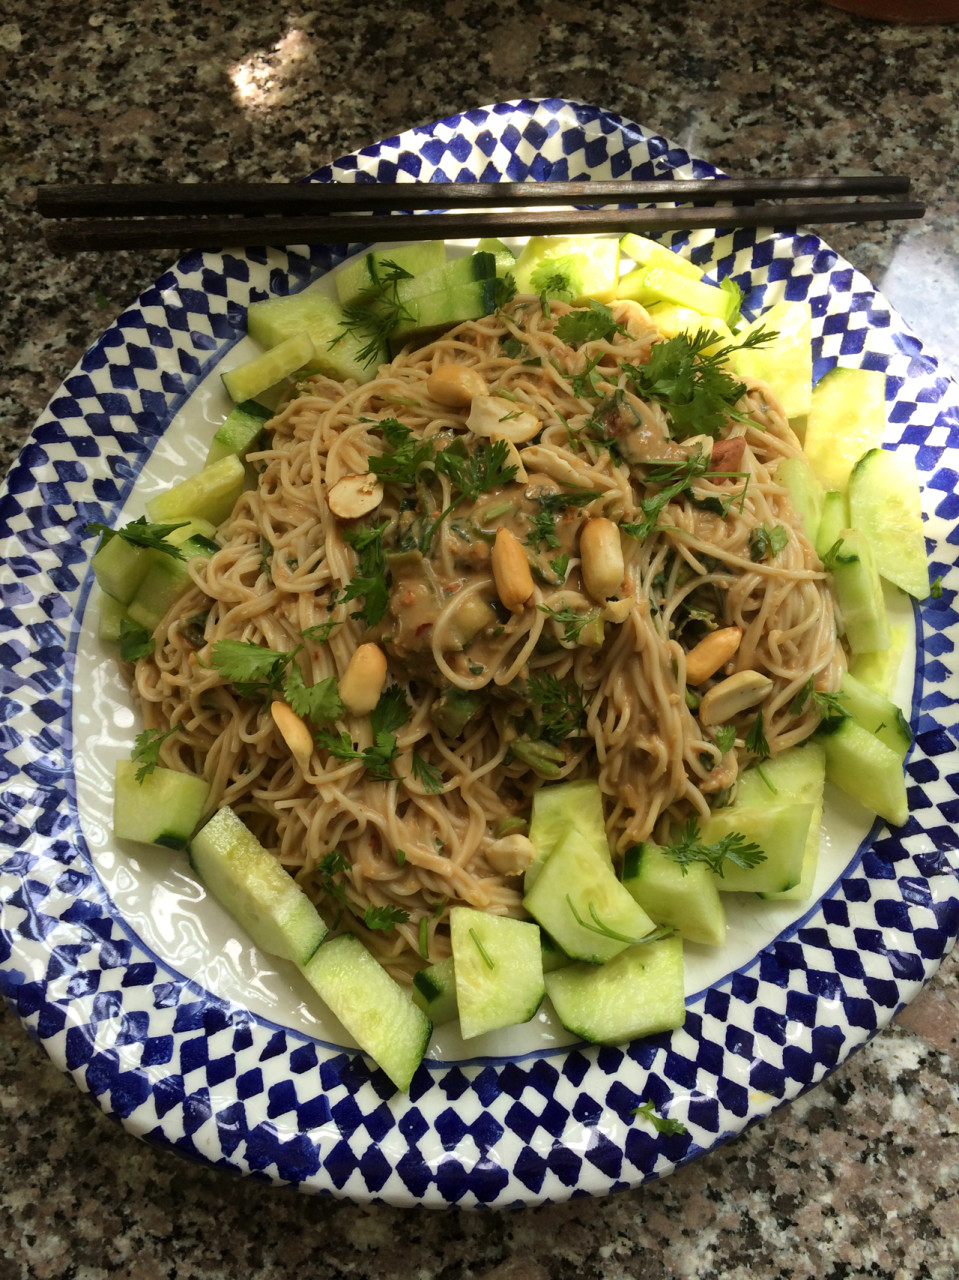 "Cold Sesame Noodles" are a perfect summer dish. (Kathy Gunst)